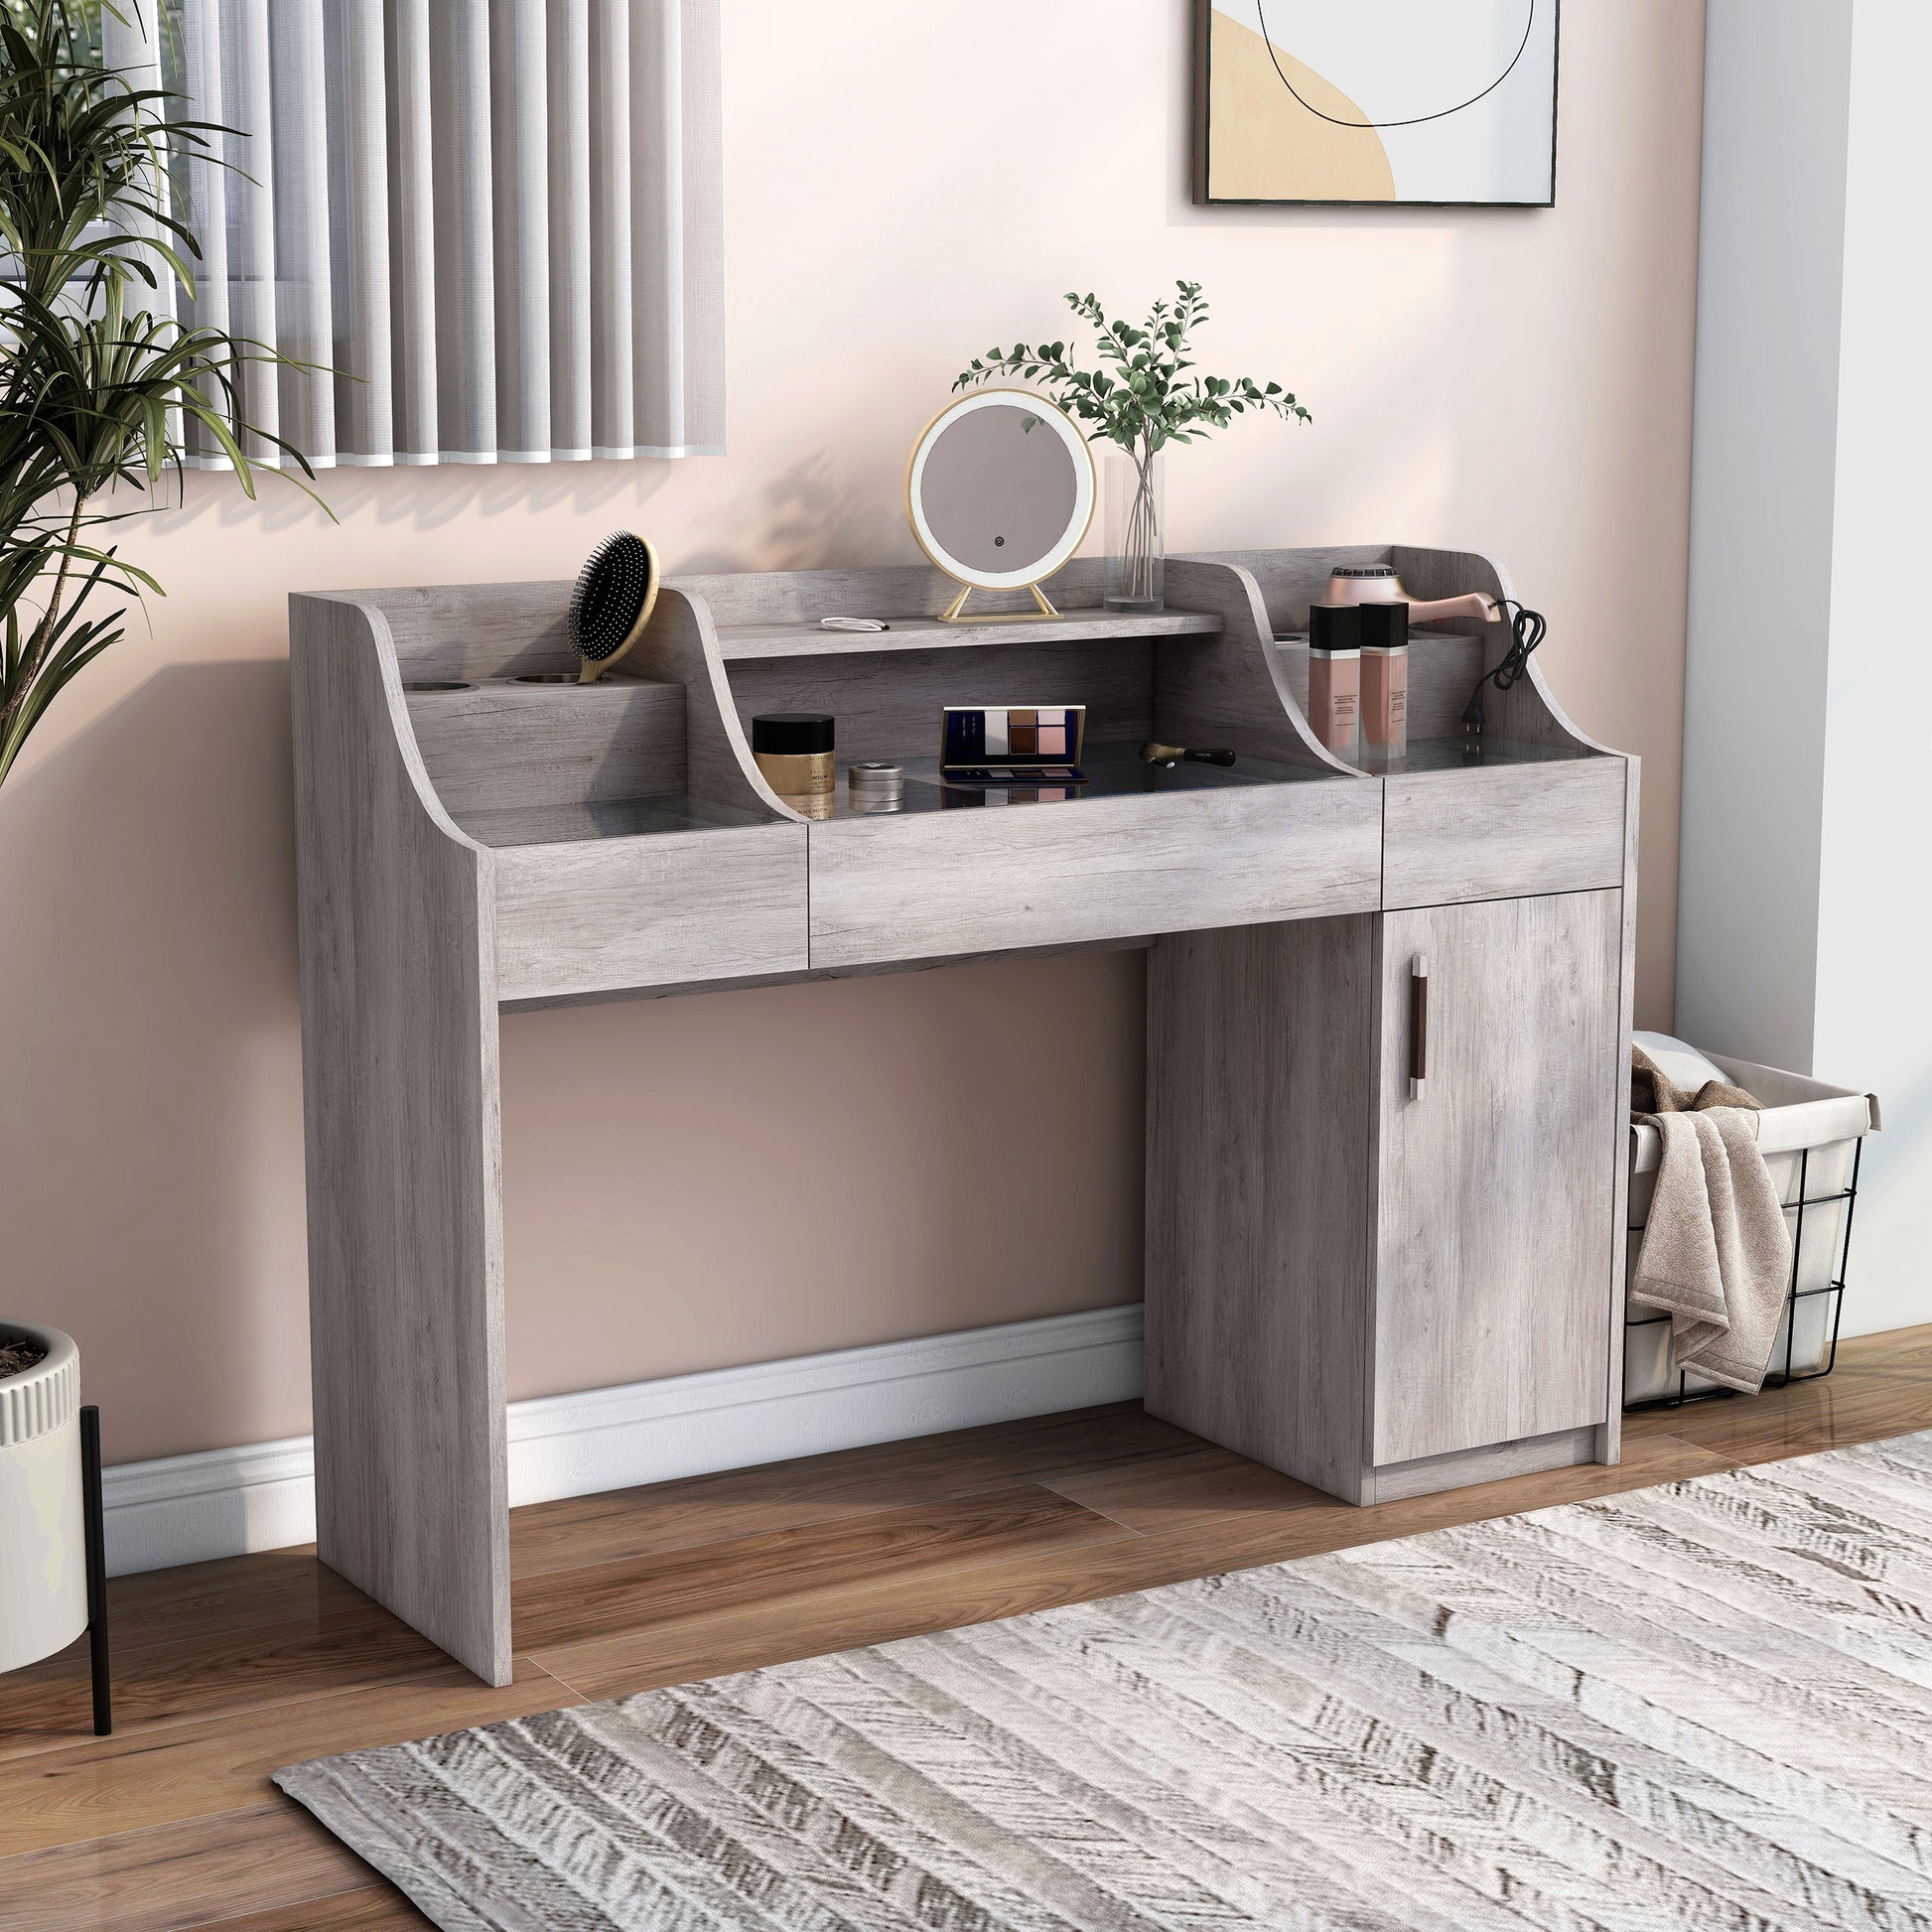 Right angled transitional coastal white three-drawer vanity table with grommets and glass drawer tops in a bedroom with accessories